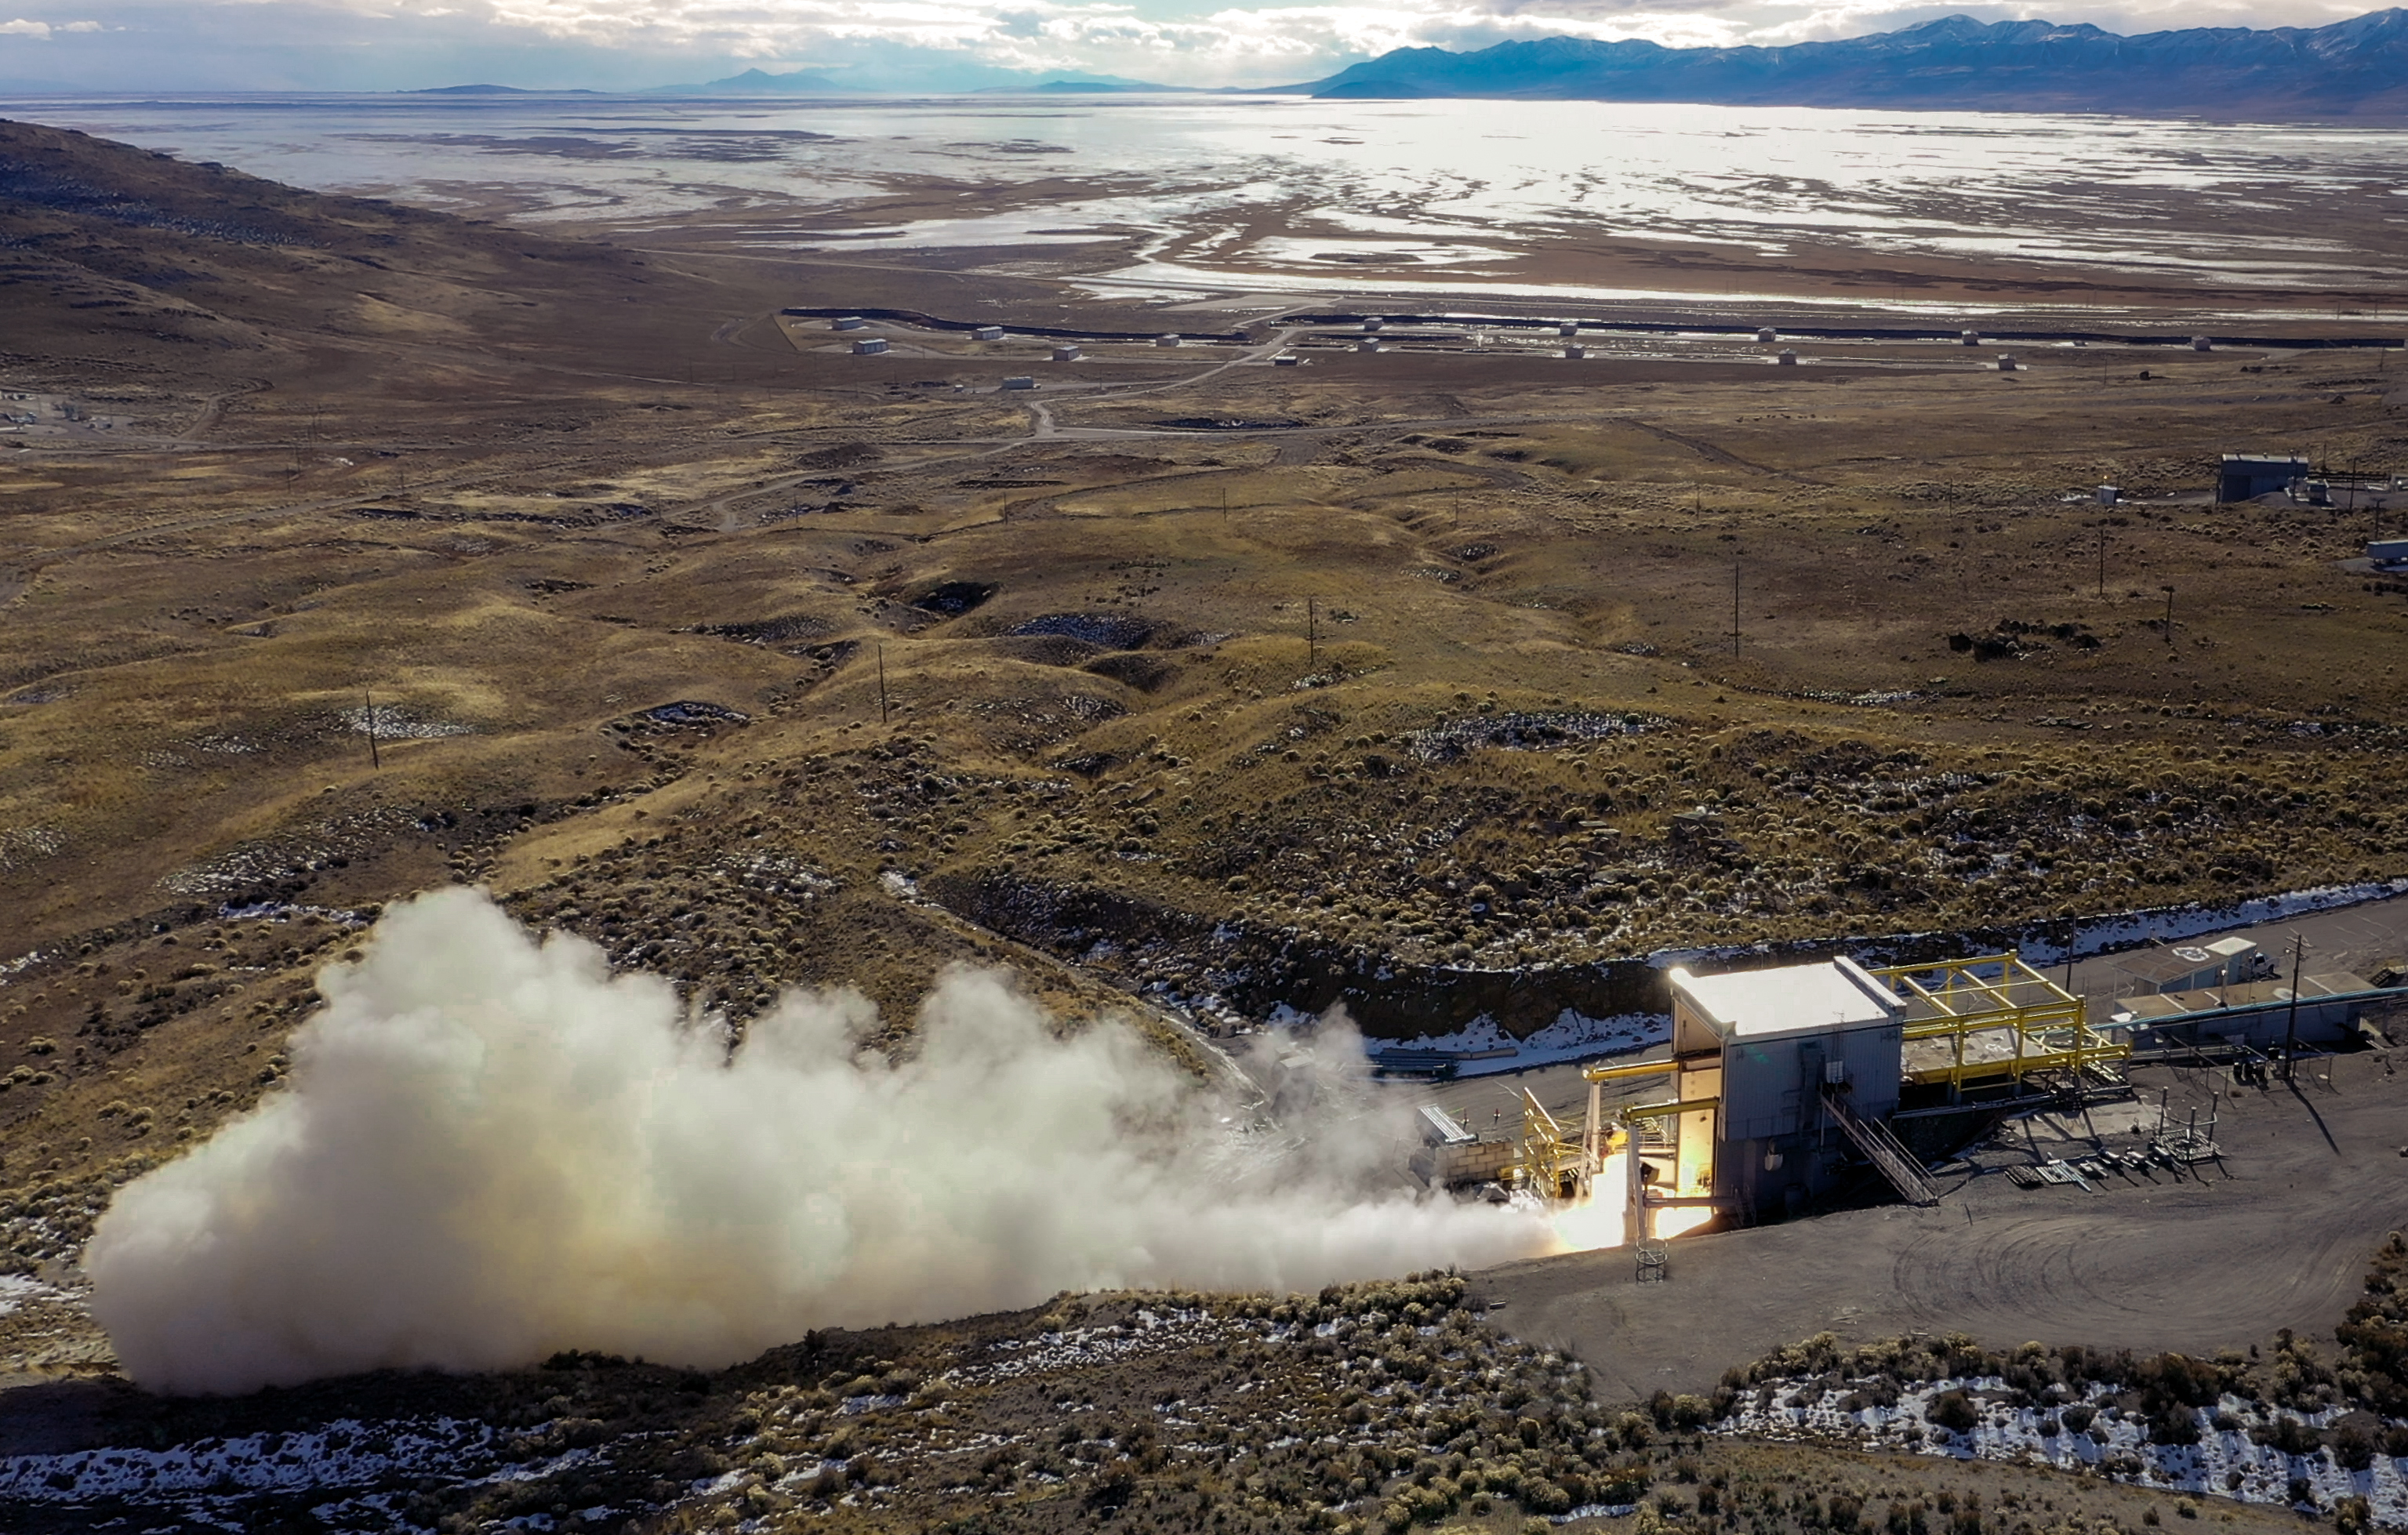 Northrop Grumman Successfully Tests a New Solid Rocket Motor Developed in Less Than a Year